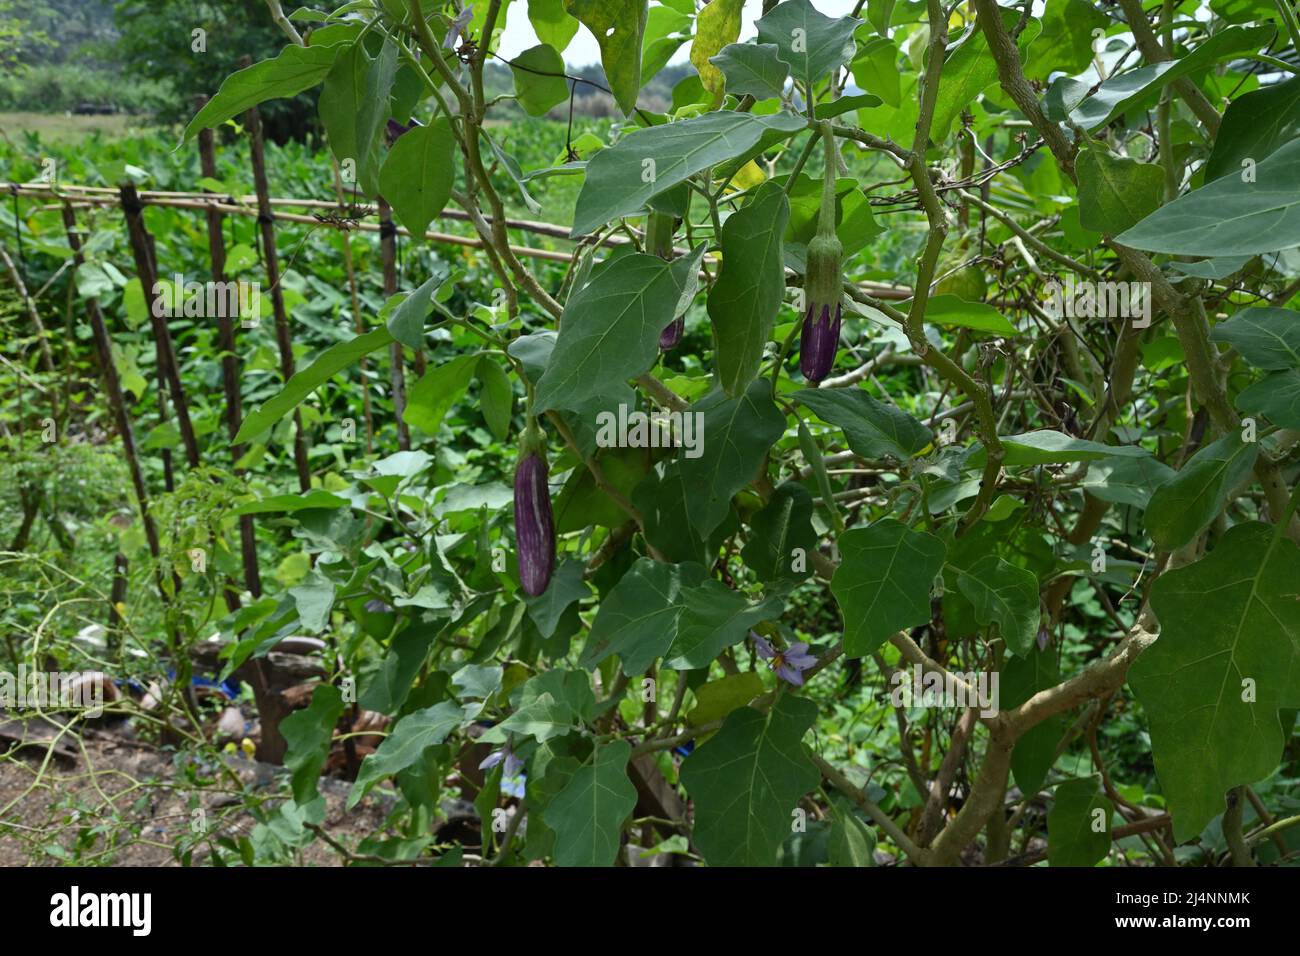 Eggplant branch with a developing long purple eggplant fruit in the garden Stock Photo